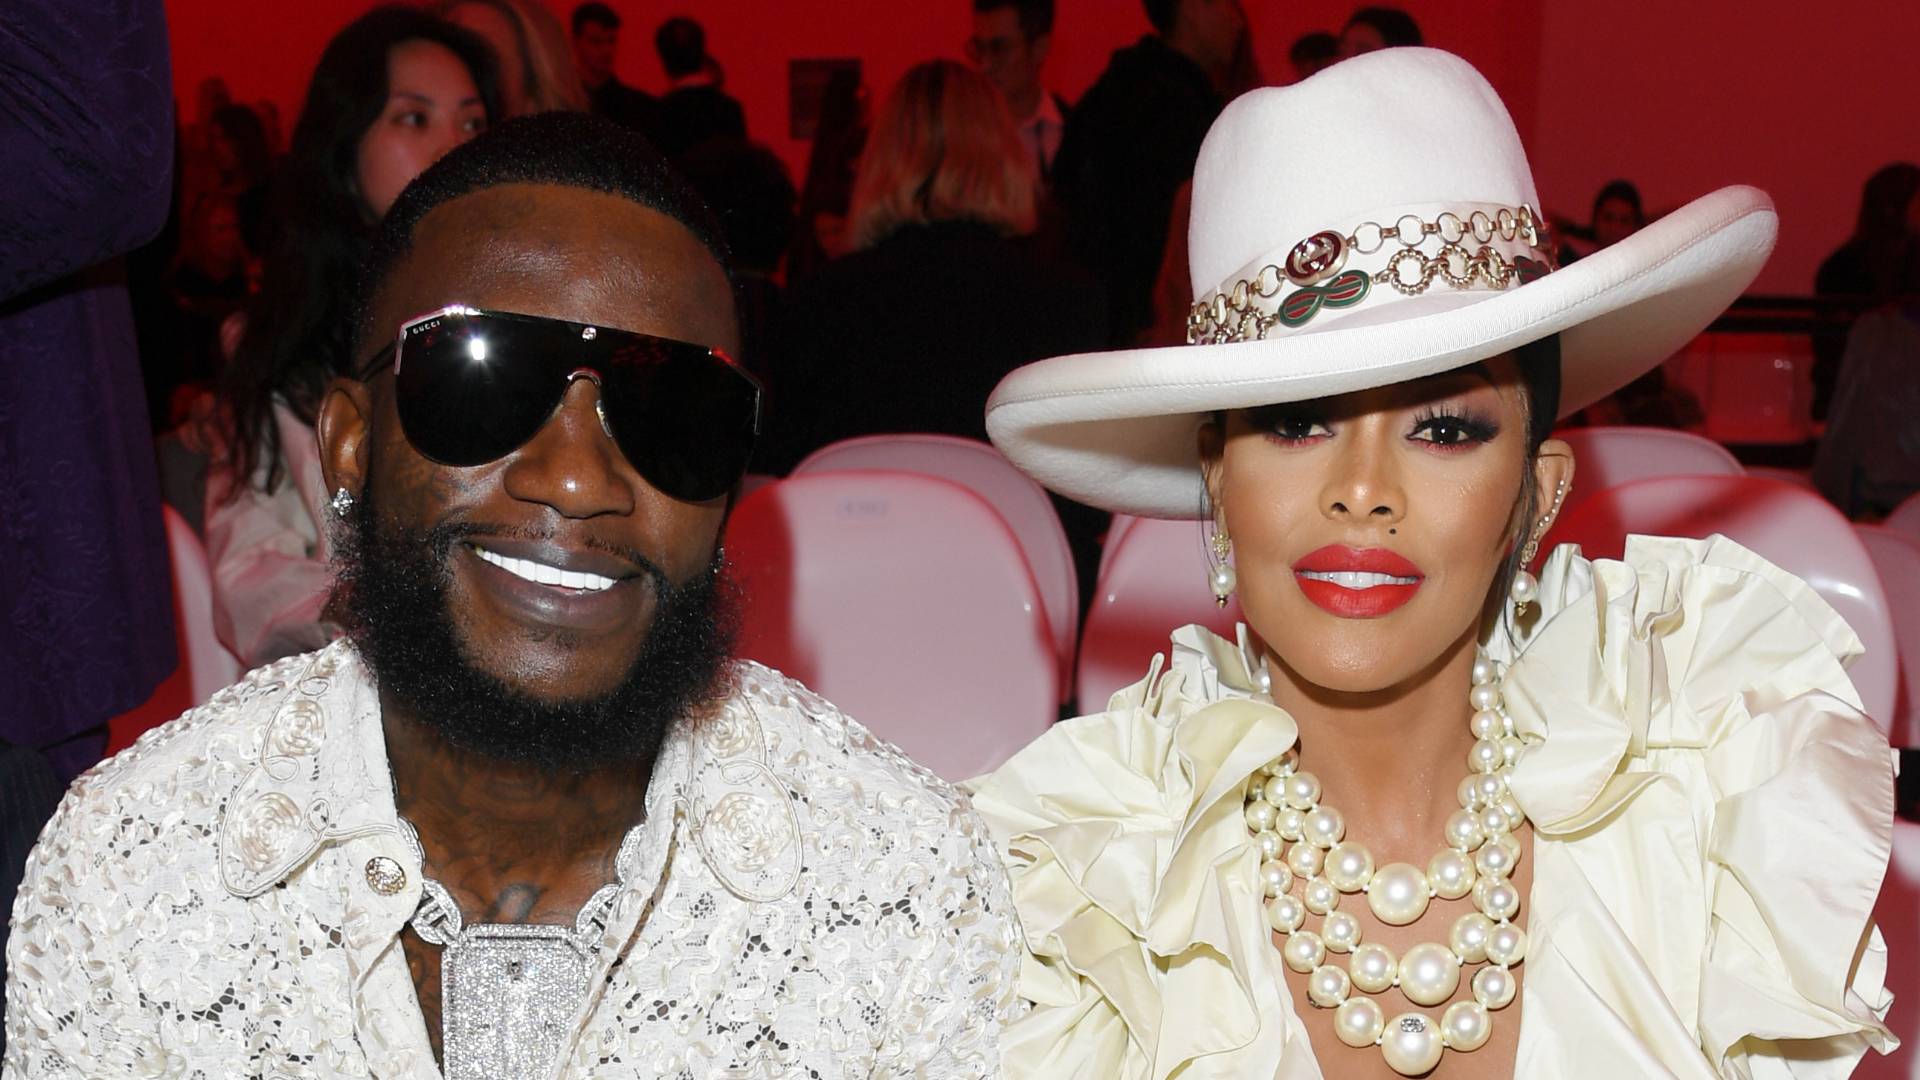 Gucci Mane and Keyshia Ka'oir attend the Gucci show during Milan Fashion Week Spring/Summer 2020 on September 22, 2019 in Milan, Italy. 